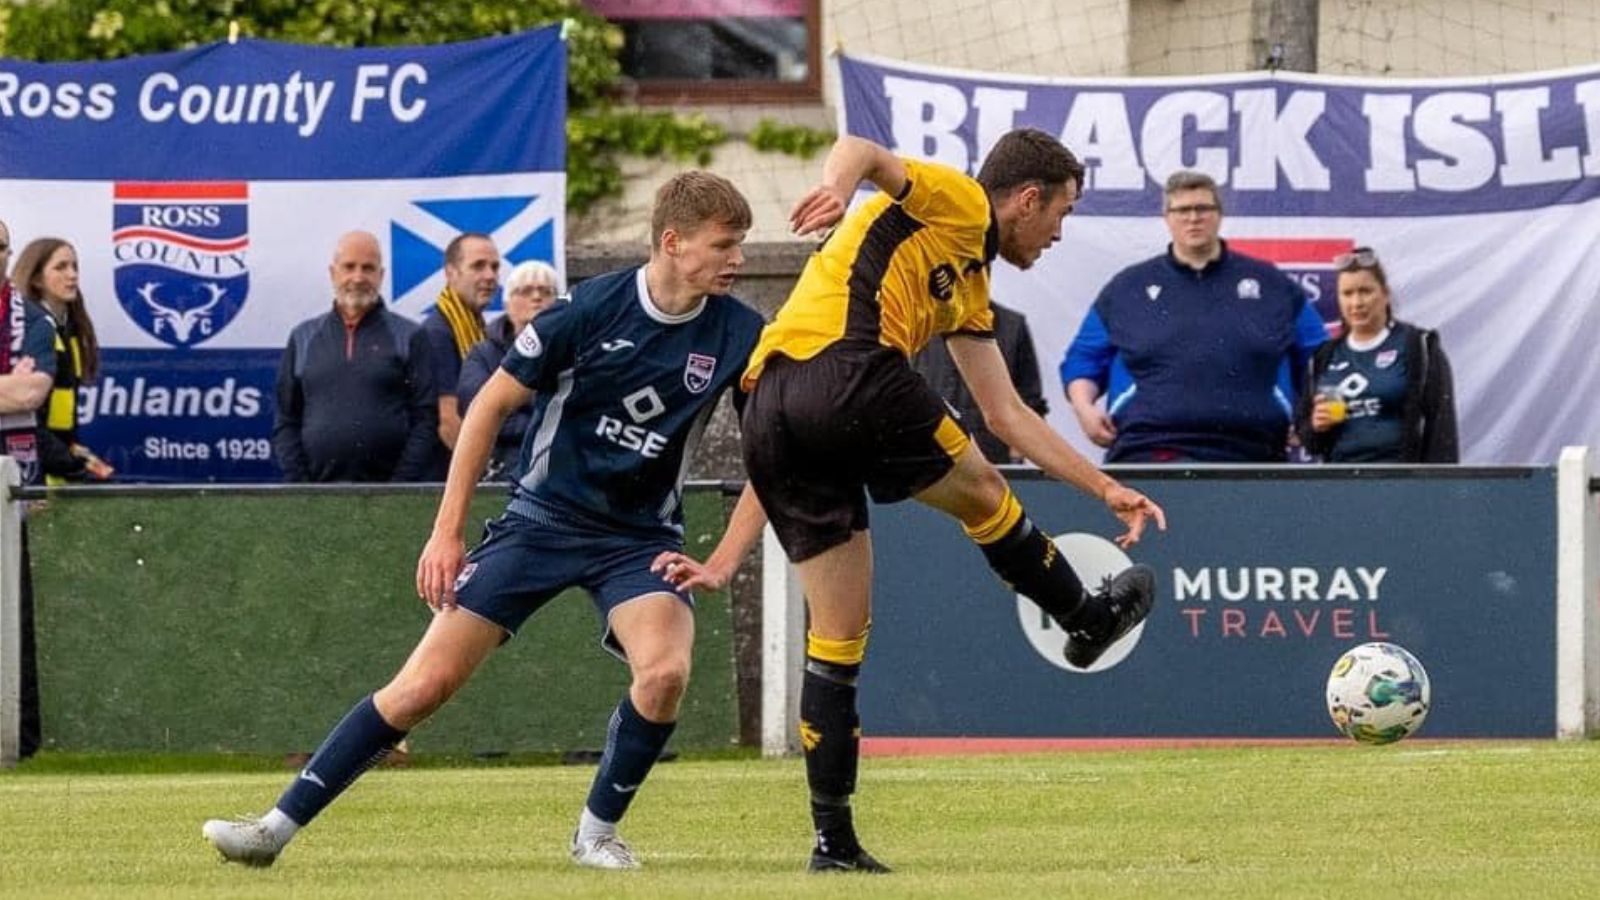 Nairn County 1 Ross County 3